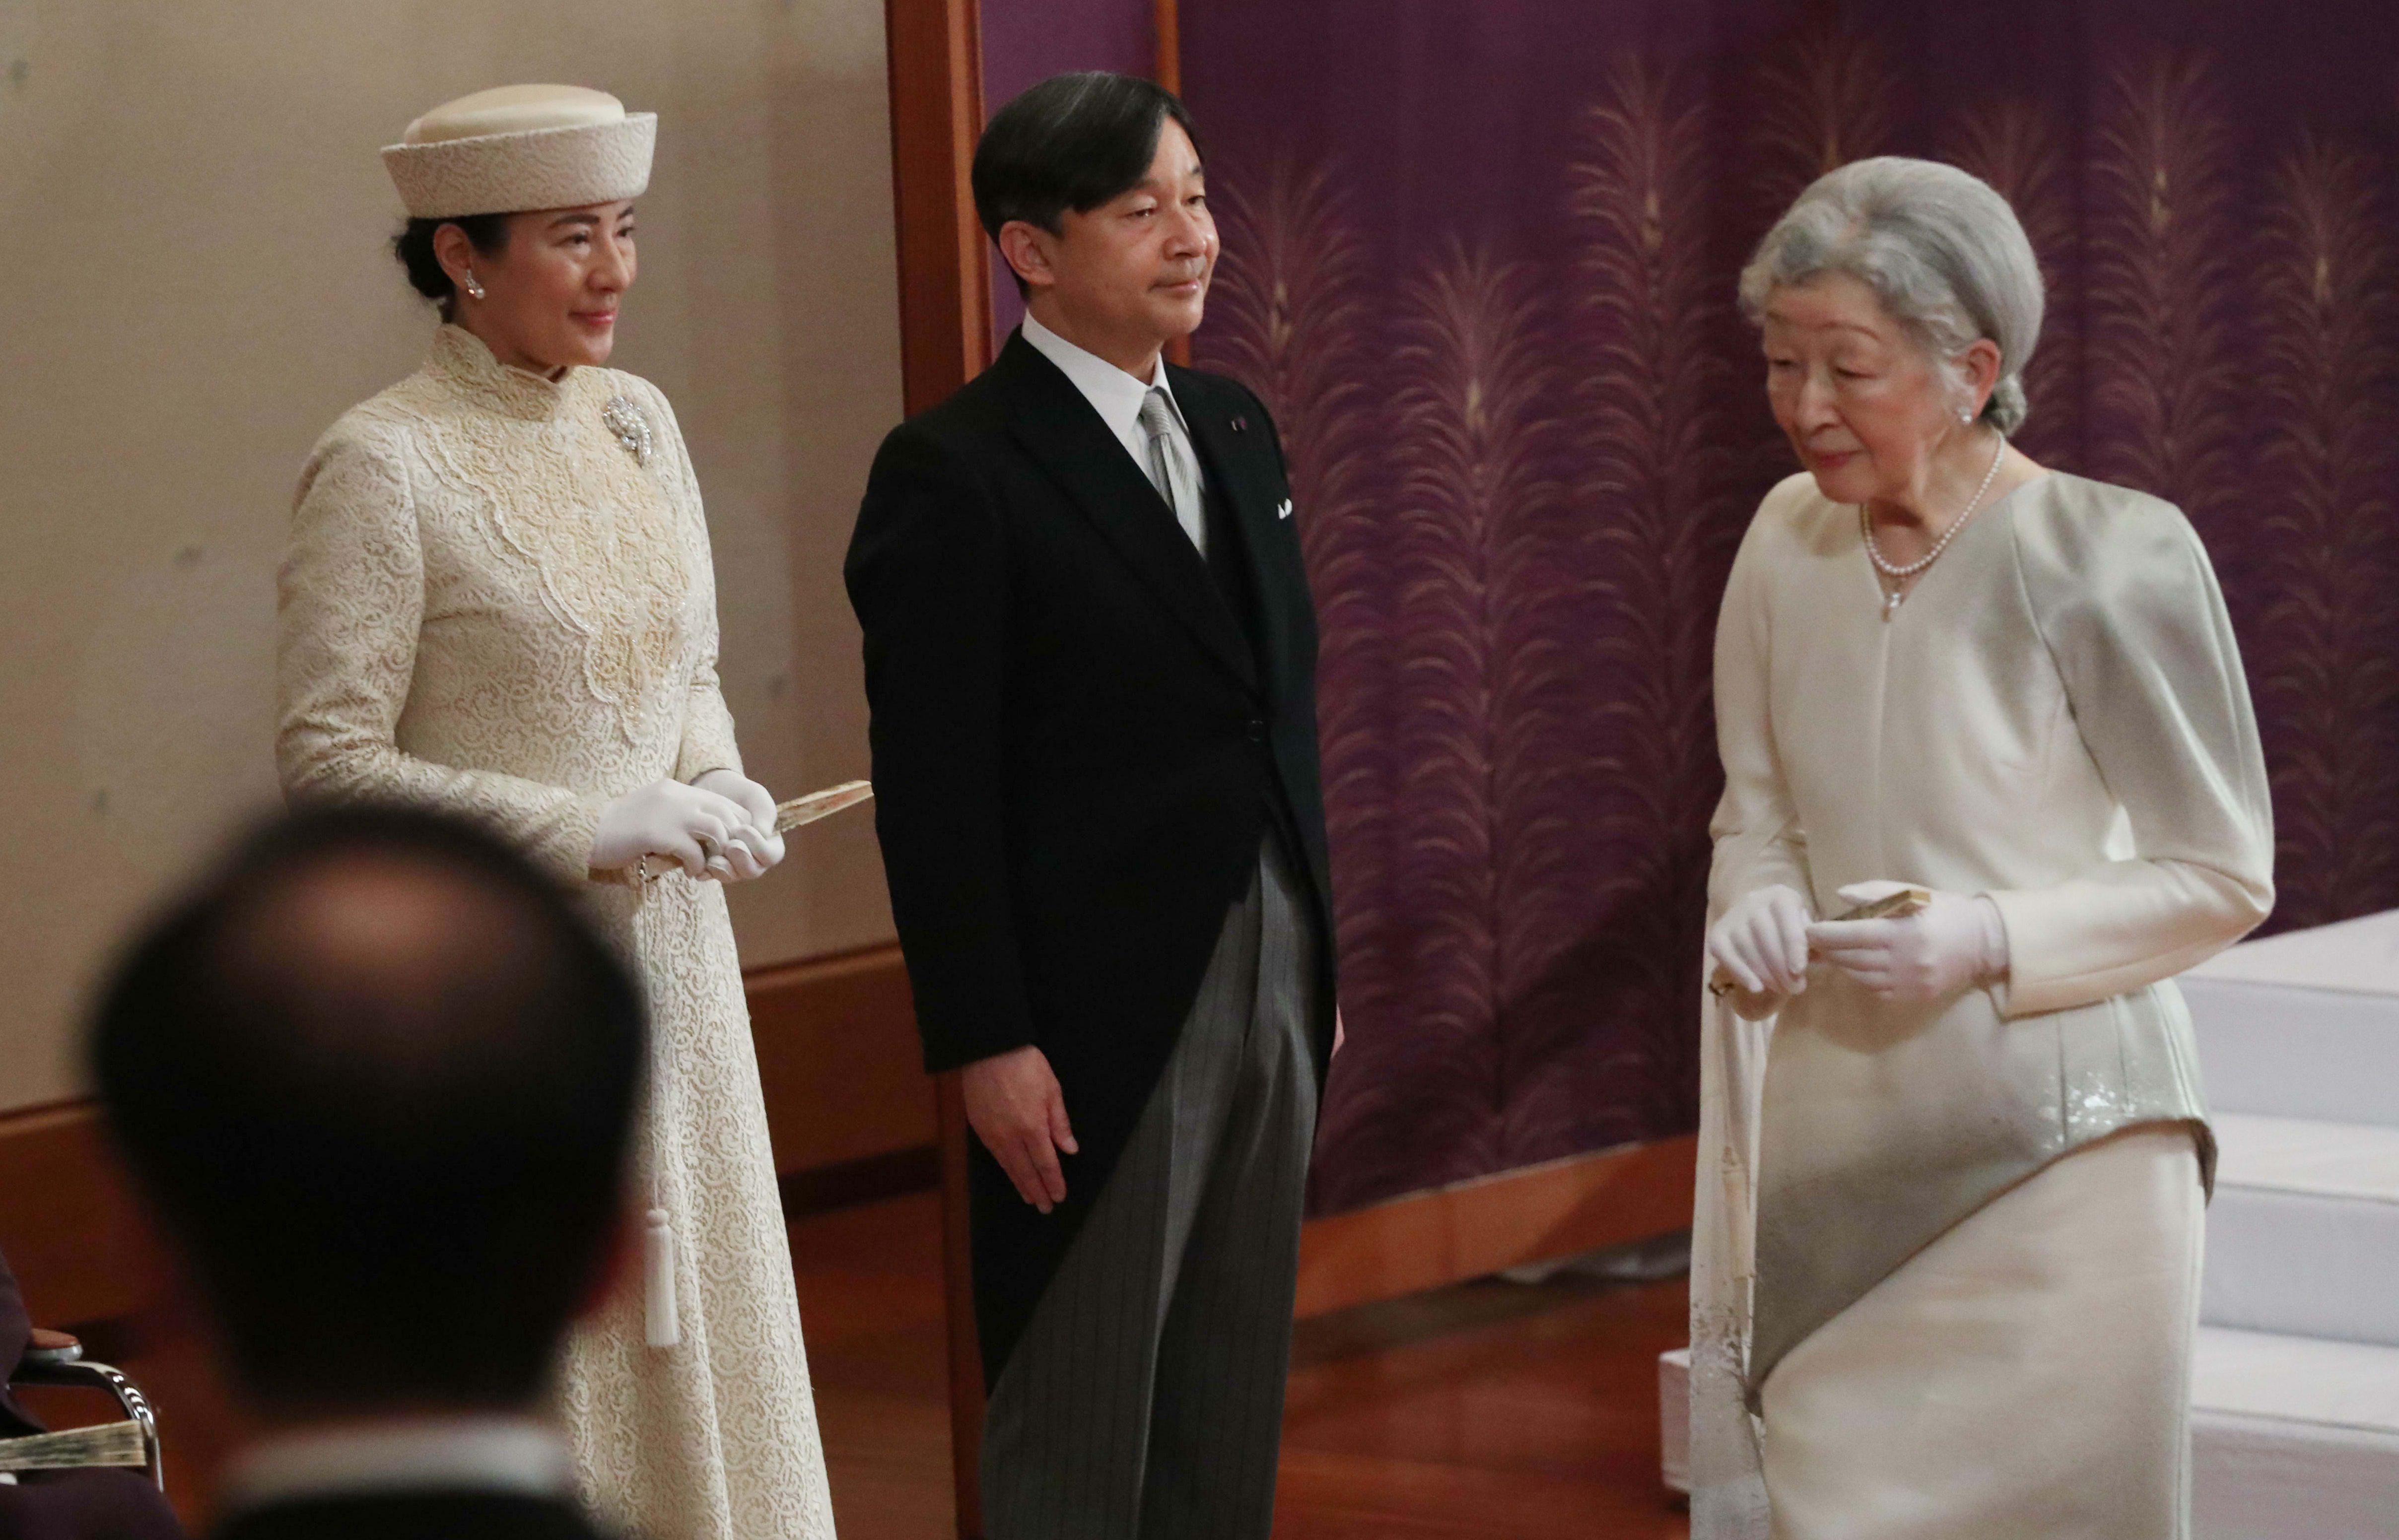 Japan's Crown Prince Naruhito and Crown Princess Masako, left, prepare to leave following Empress Michiko after the ceremony of Emperor Akihito's abdication at the Imperial Palace in Tokyo on 30 April, 2019.